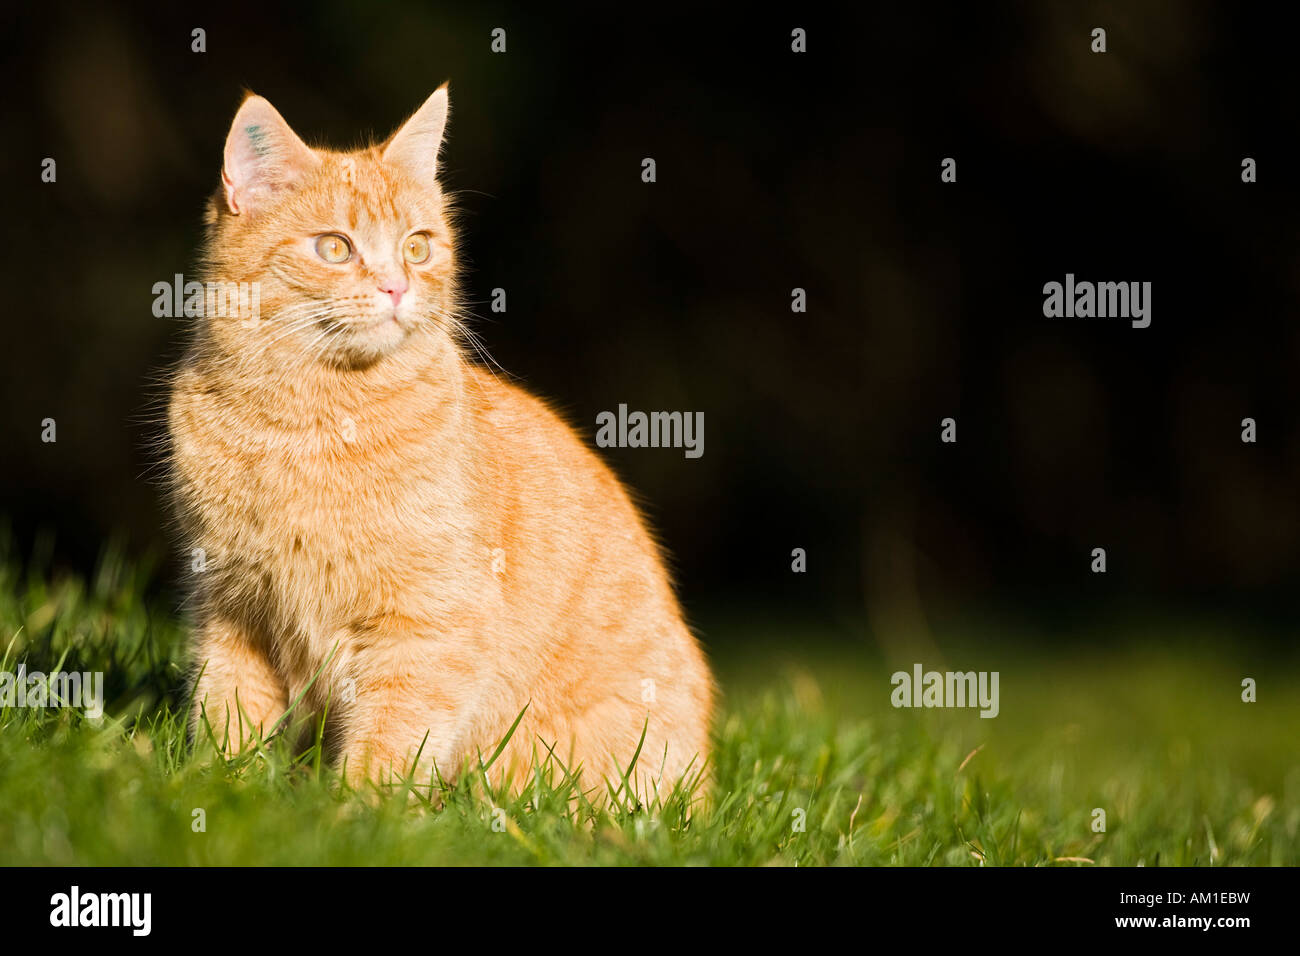 European shorthair cat is sitting in a meadow Stock Photo